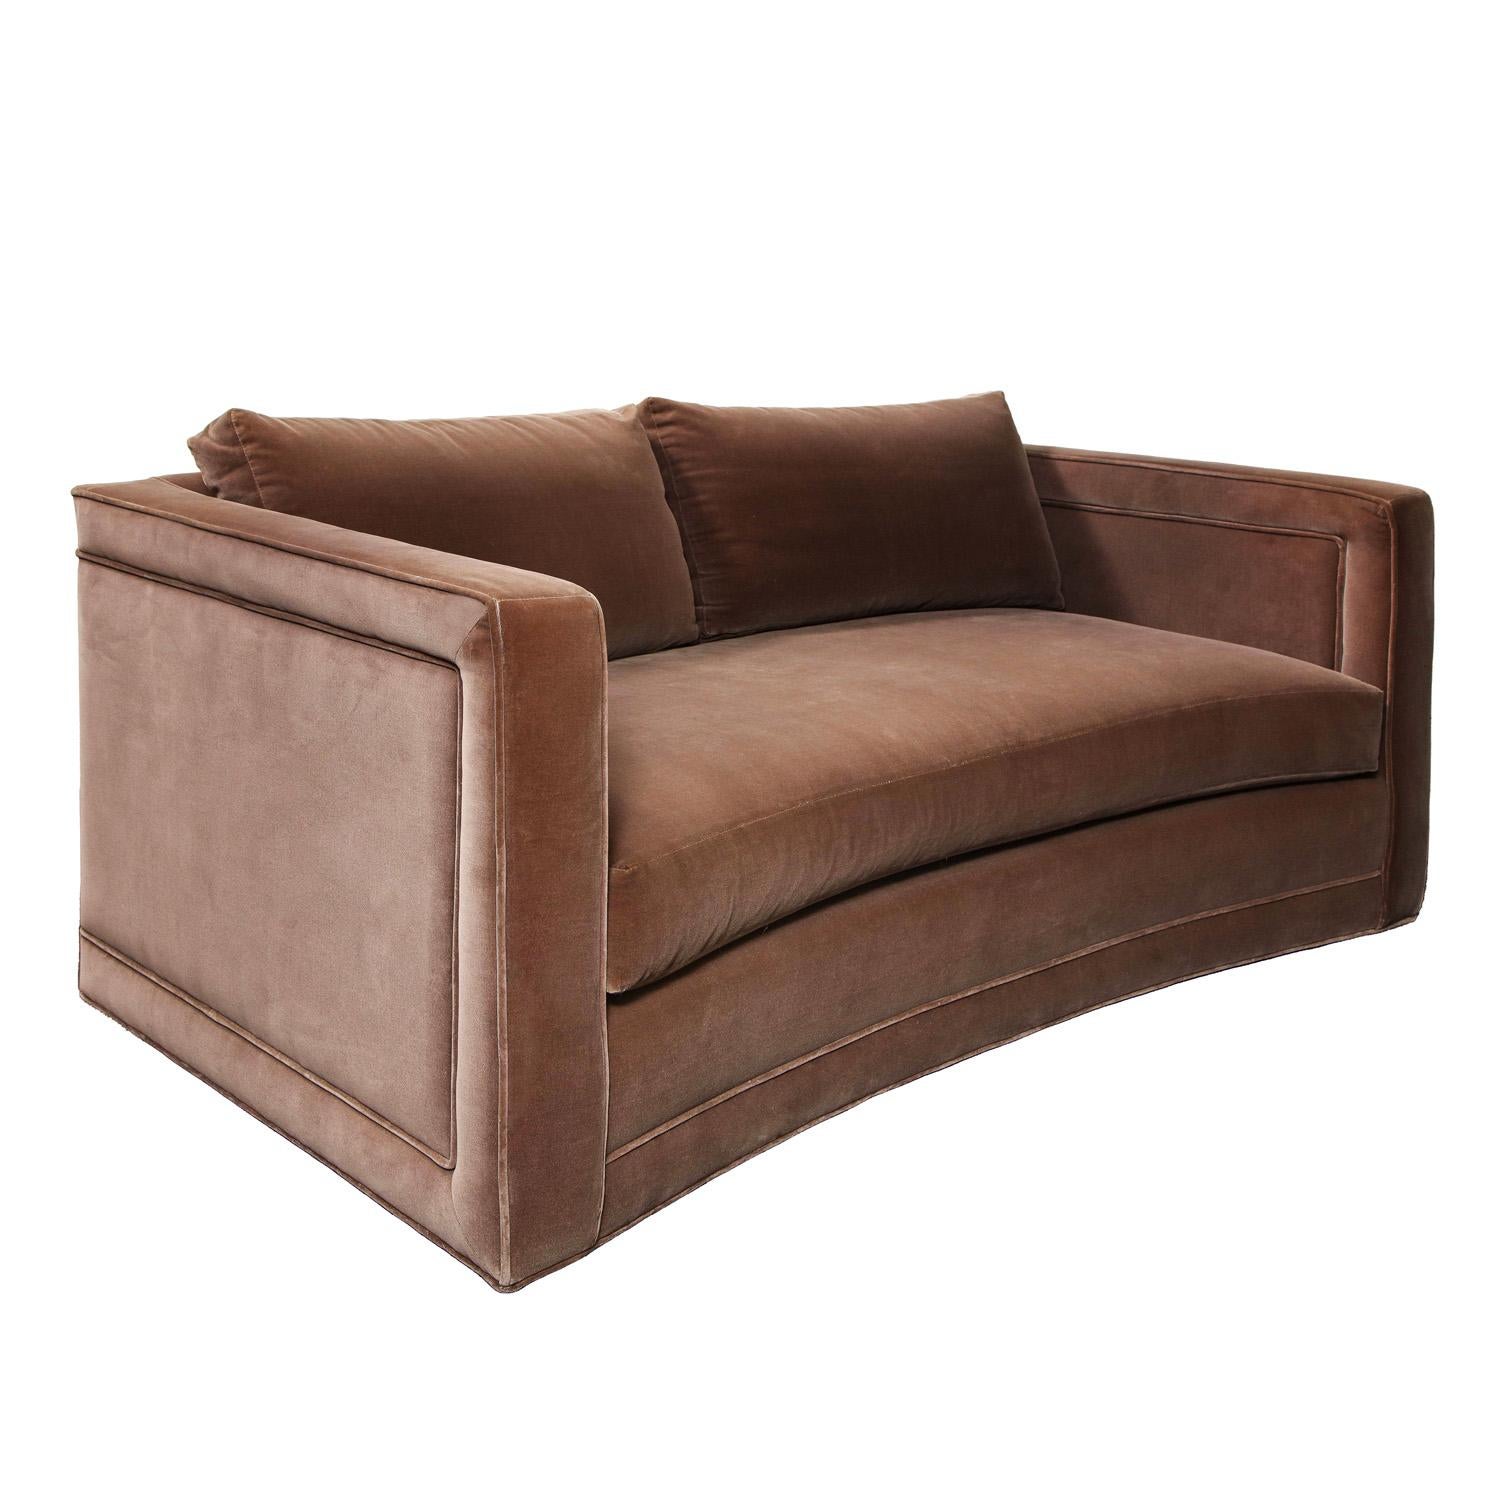 Elegant gently curved sofa in mocha color cotton velvet.  The upholstery has some small blemishes and stains consistent with age and use.
